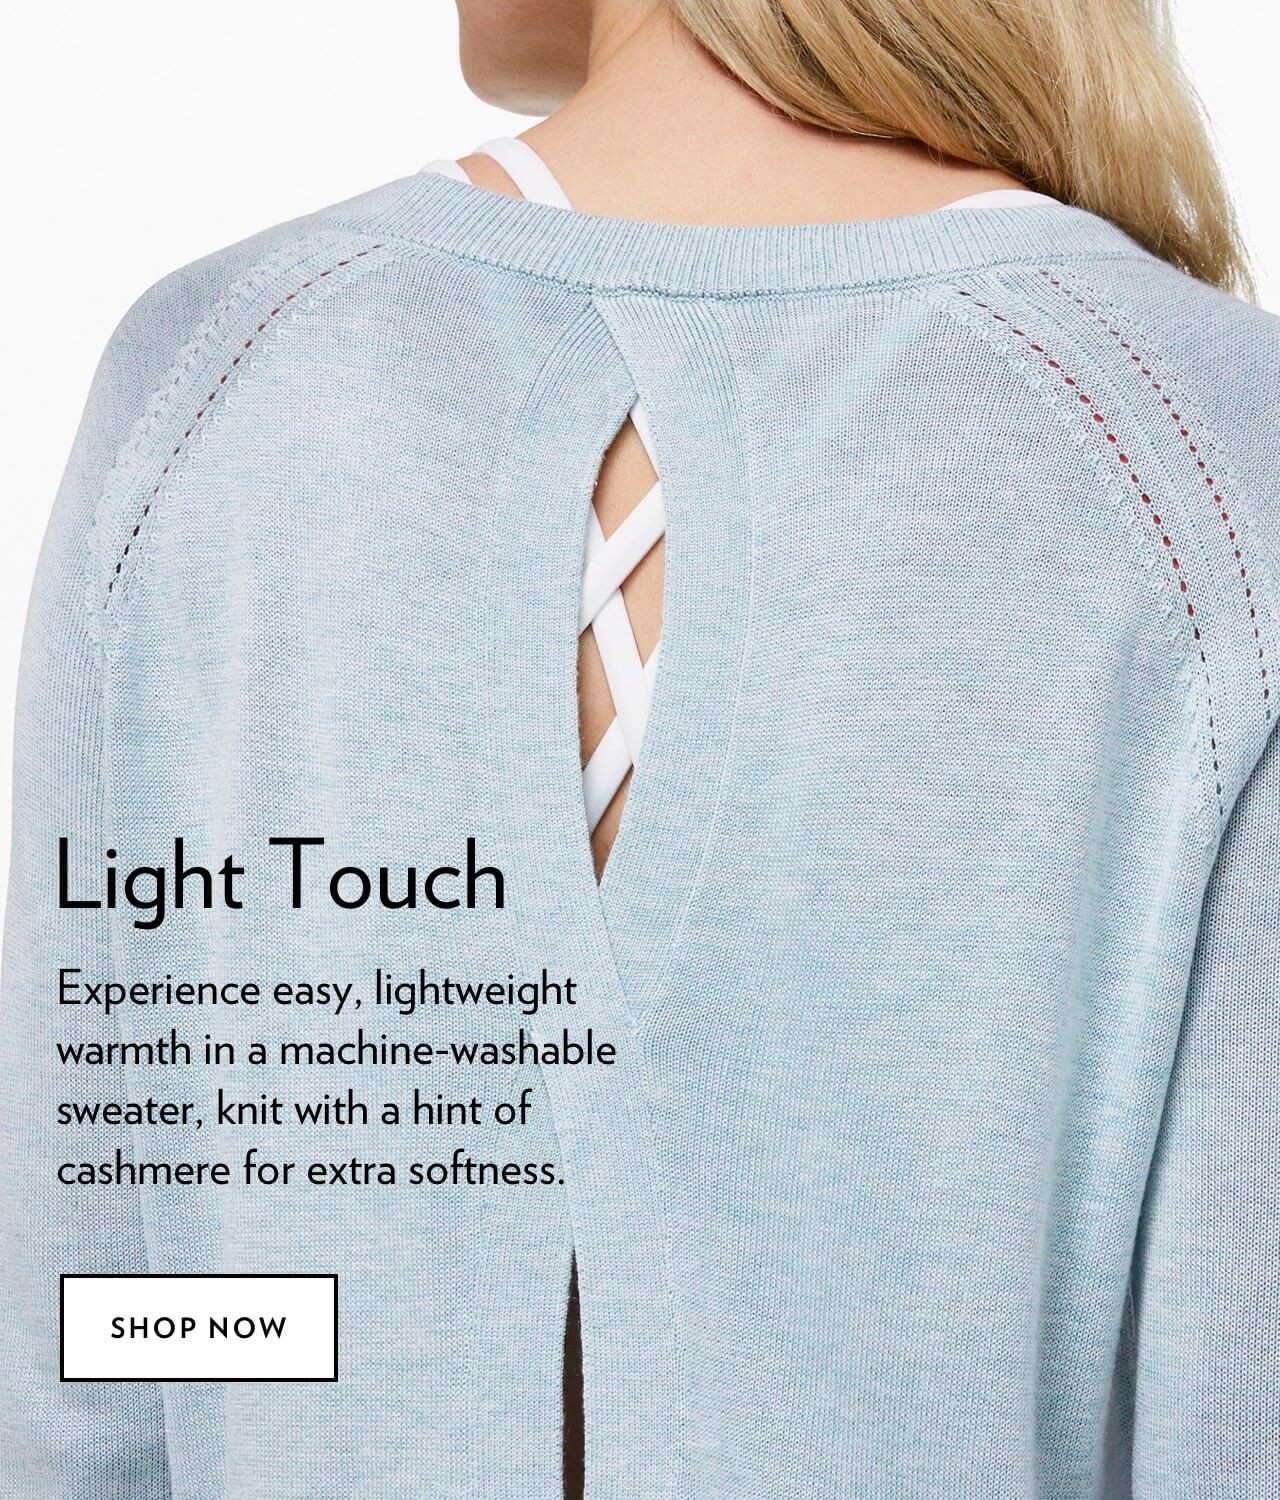 Light Touch - SHOP NOW